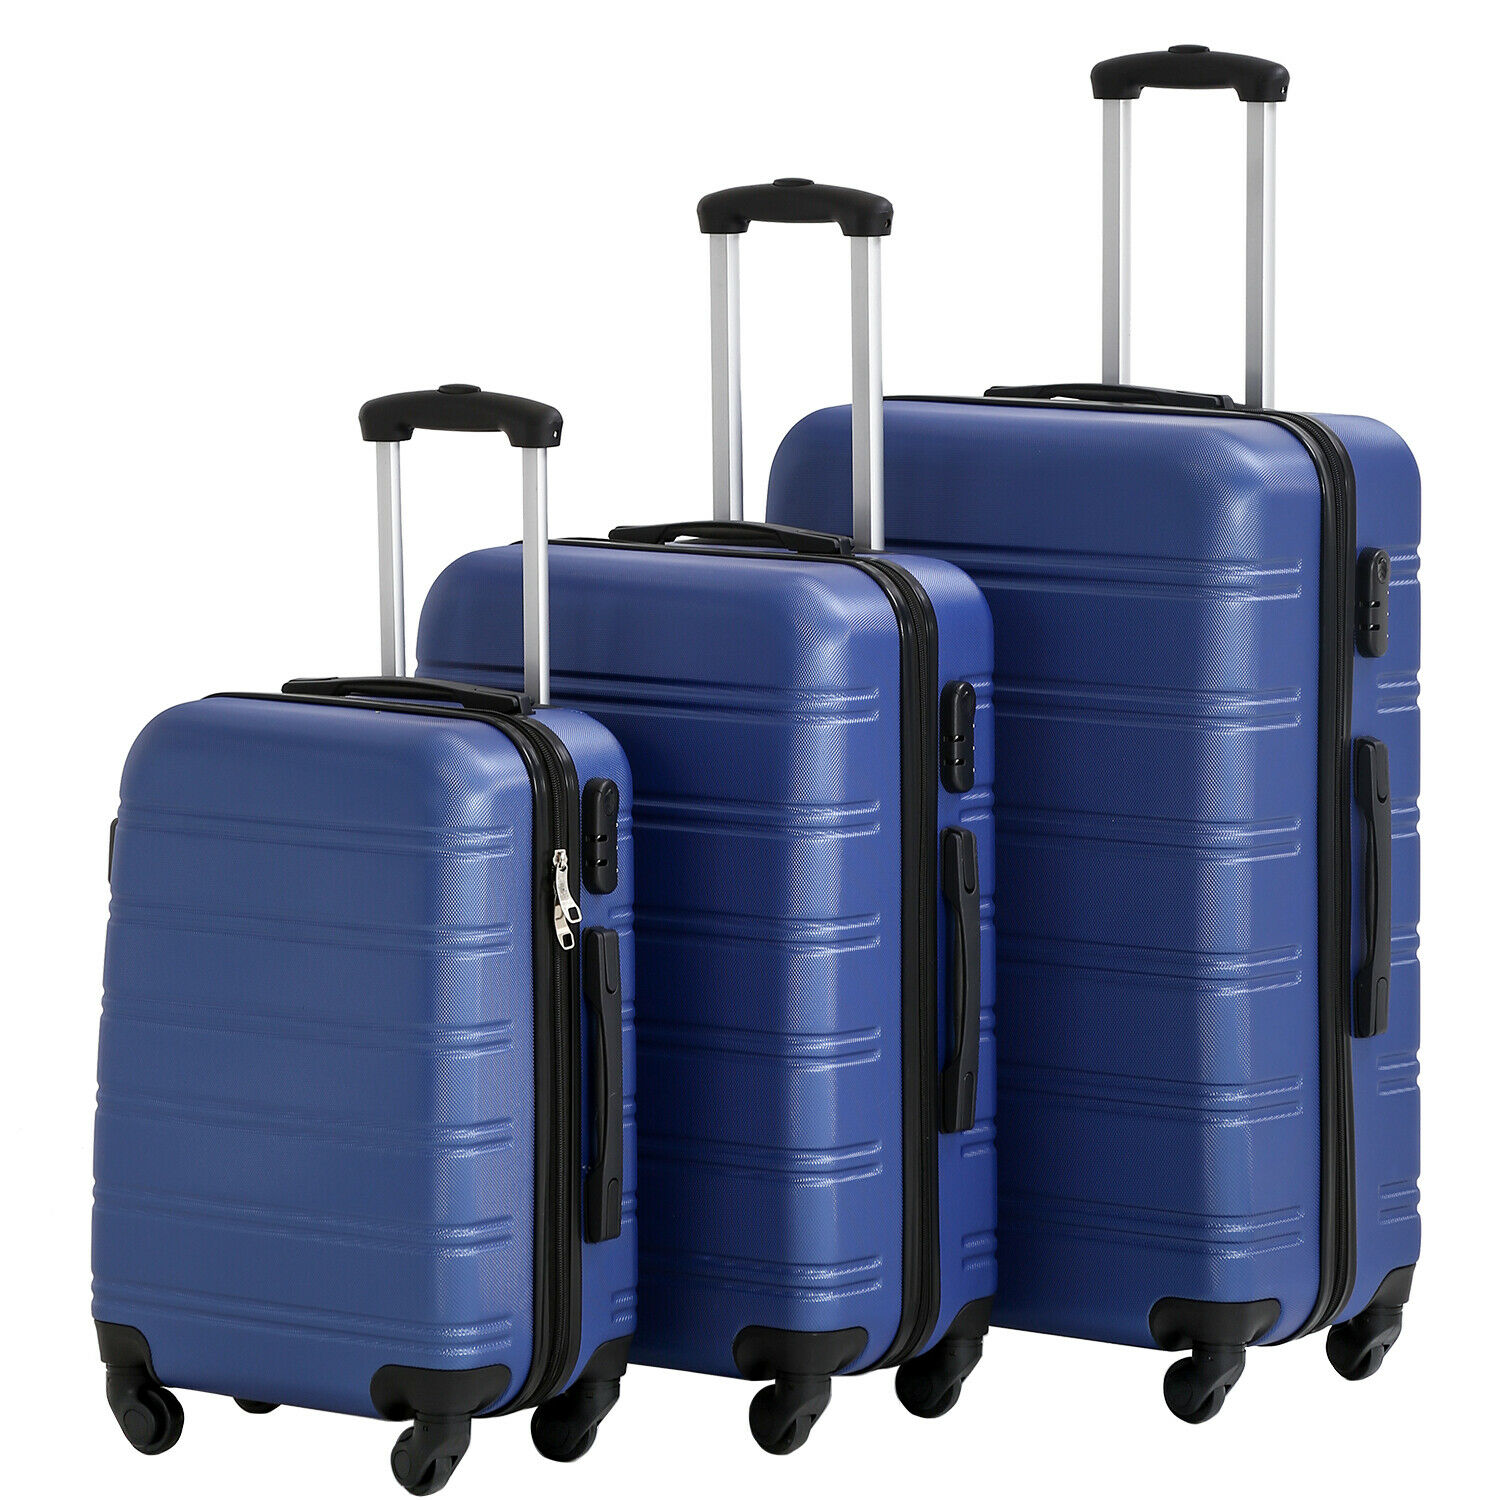 Factory Direct: Hard shell Luggage Sets Spinner Wheels 3 Piece Suitcase ...